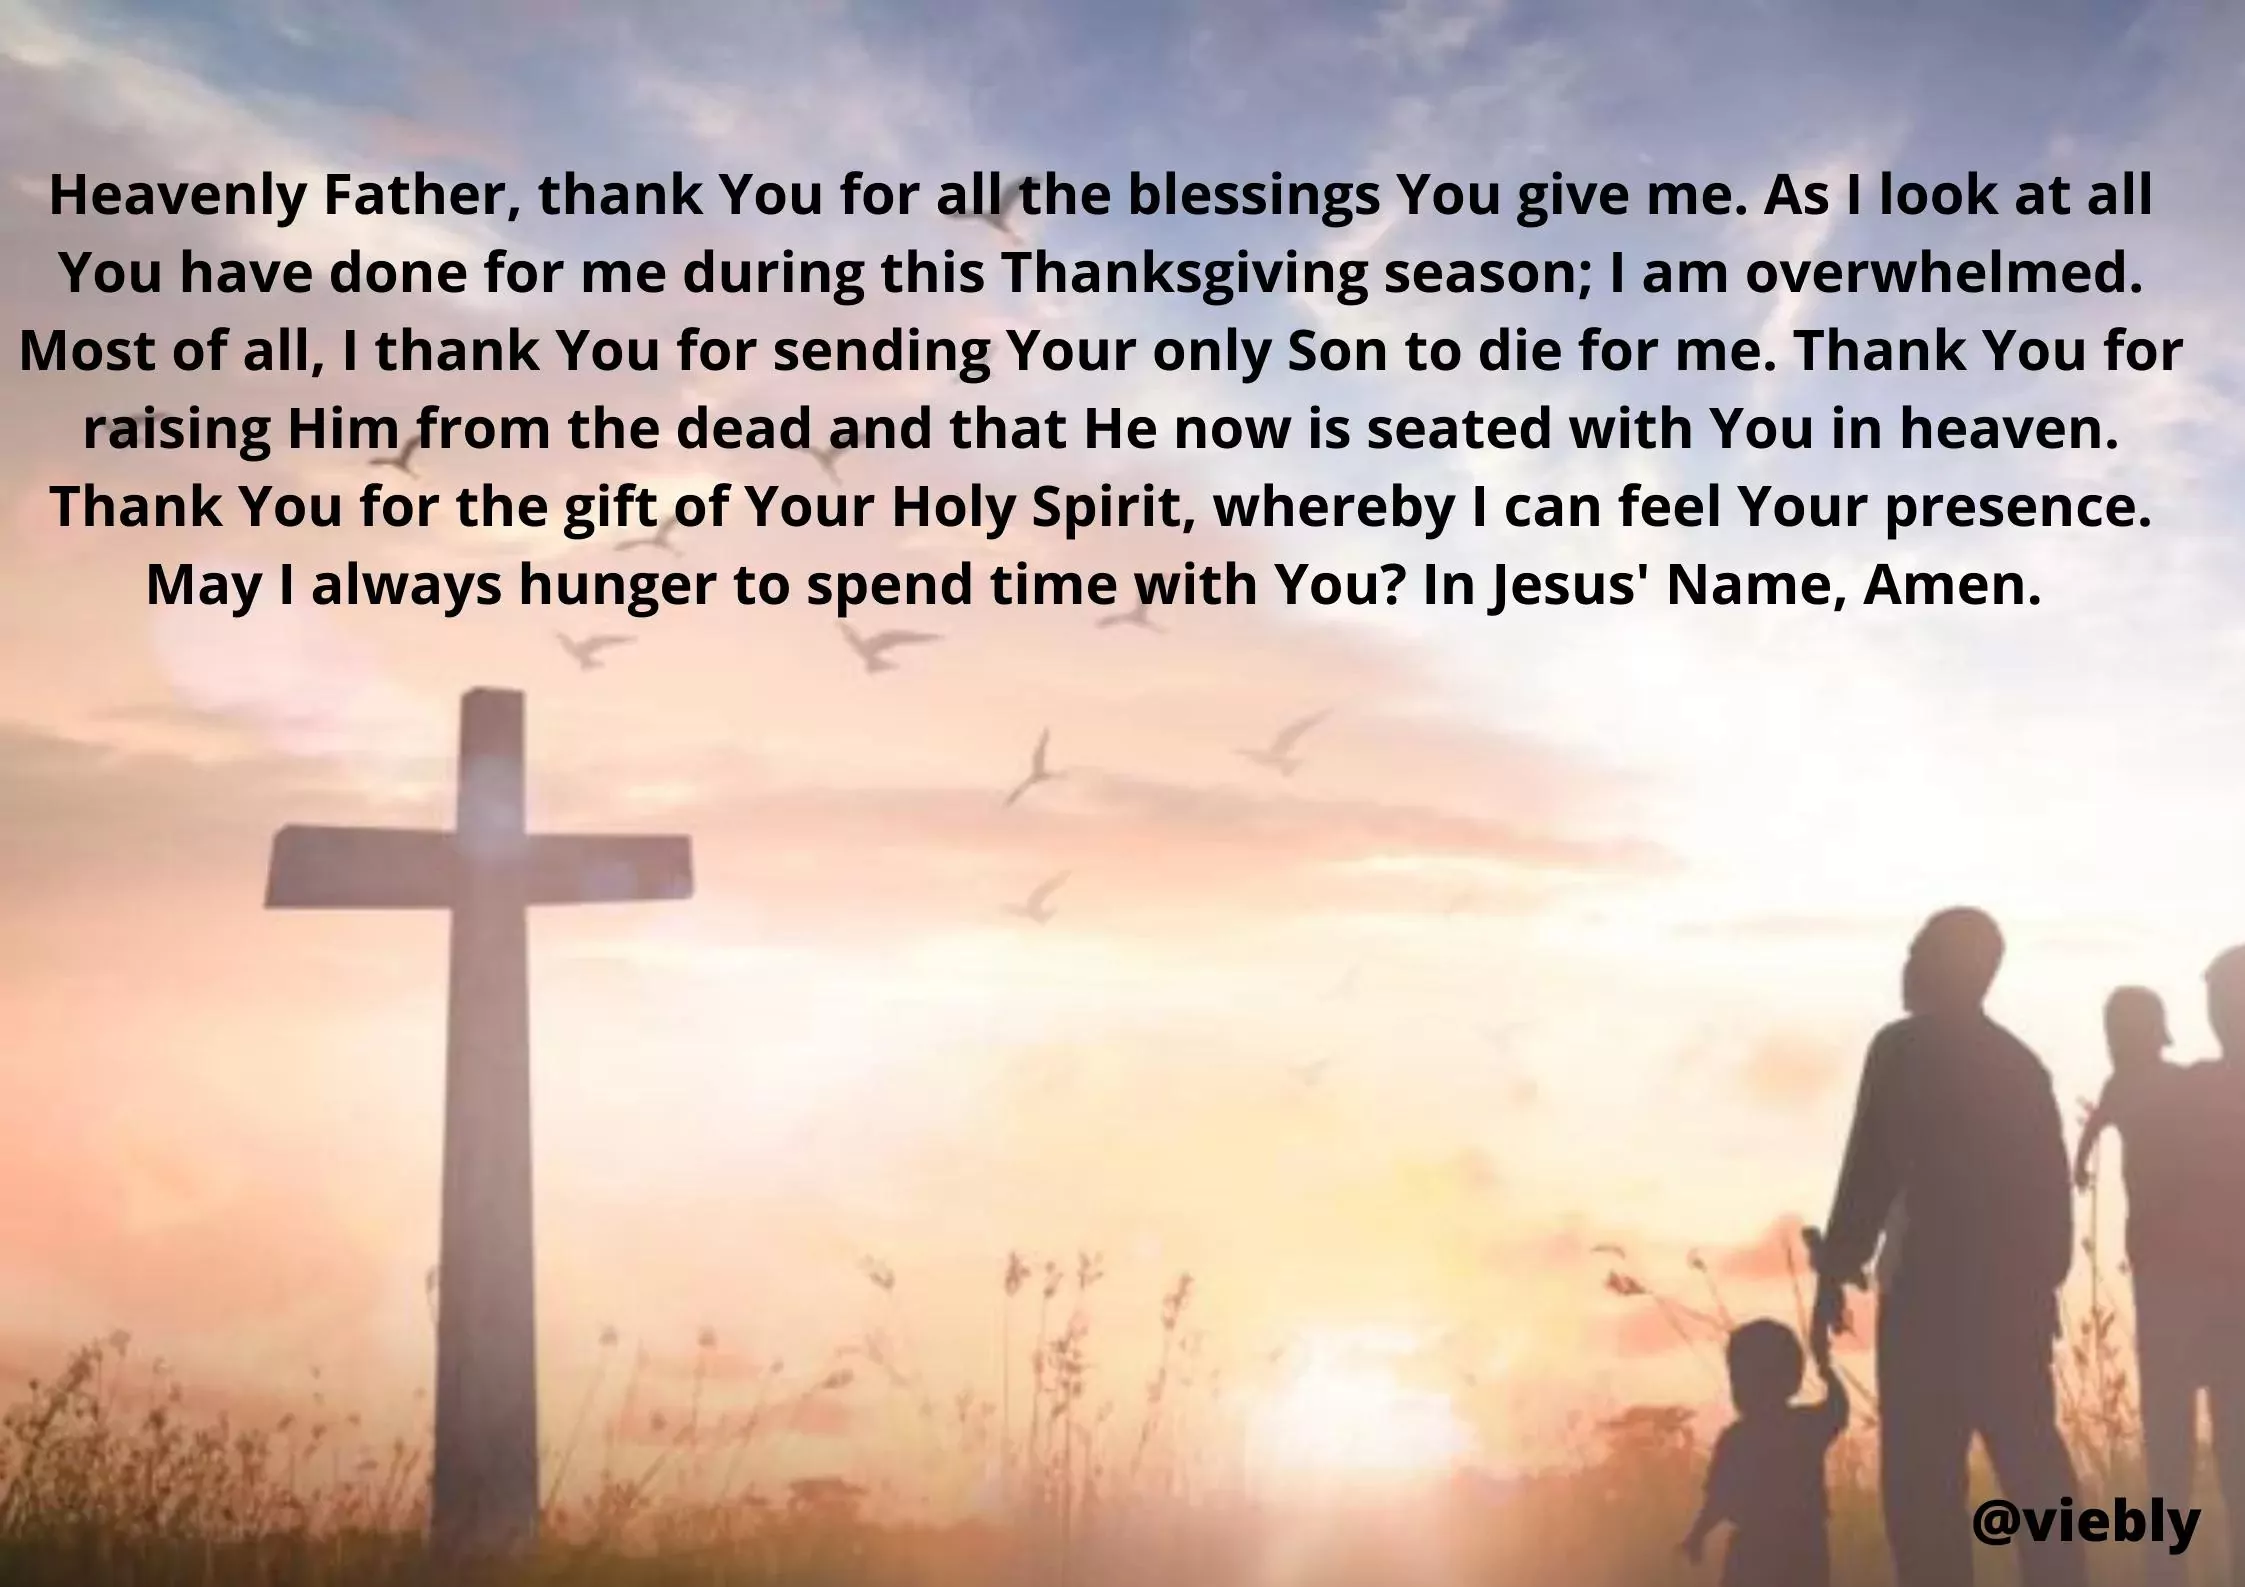 15 Popular Thanksgiving Prayers | Thanking with Almighty Words